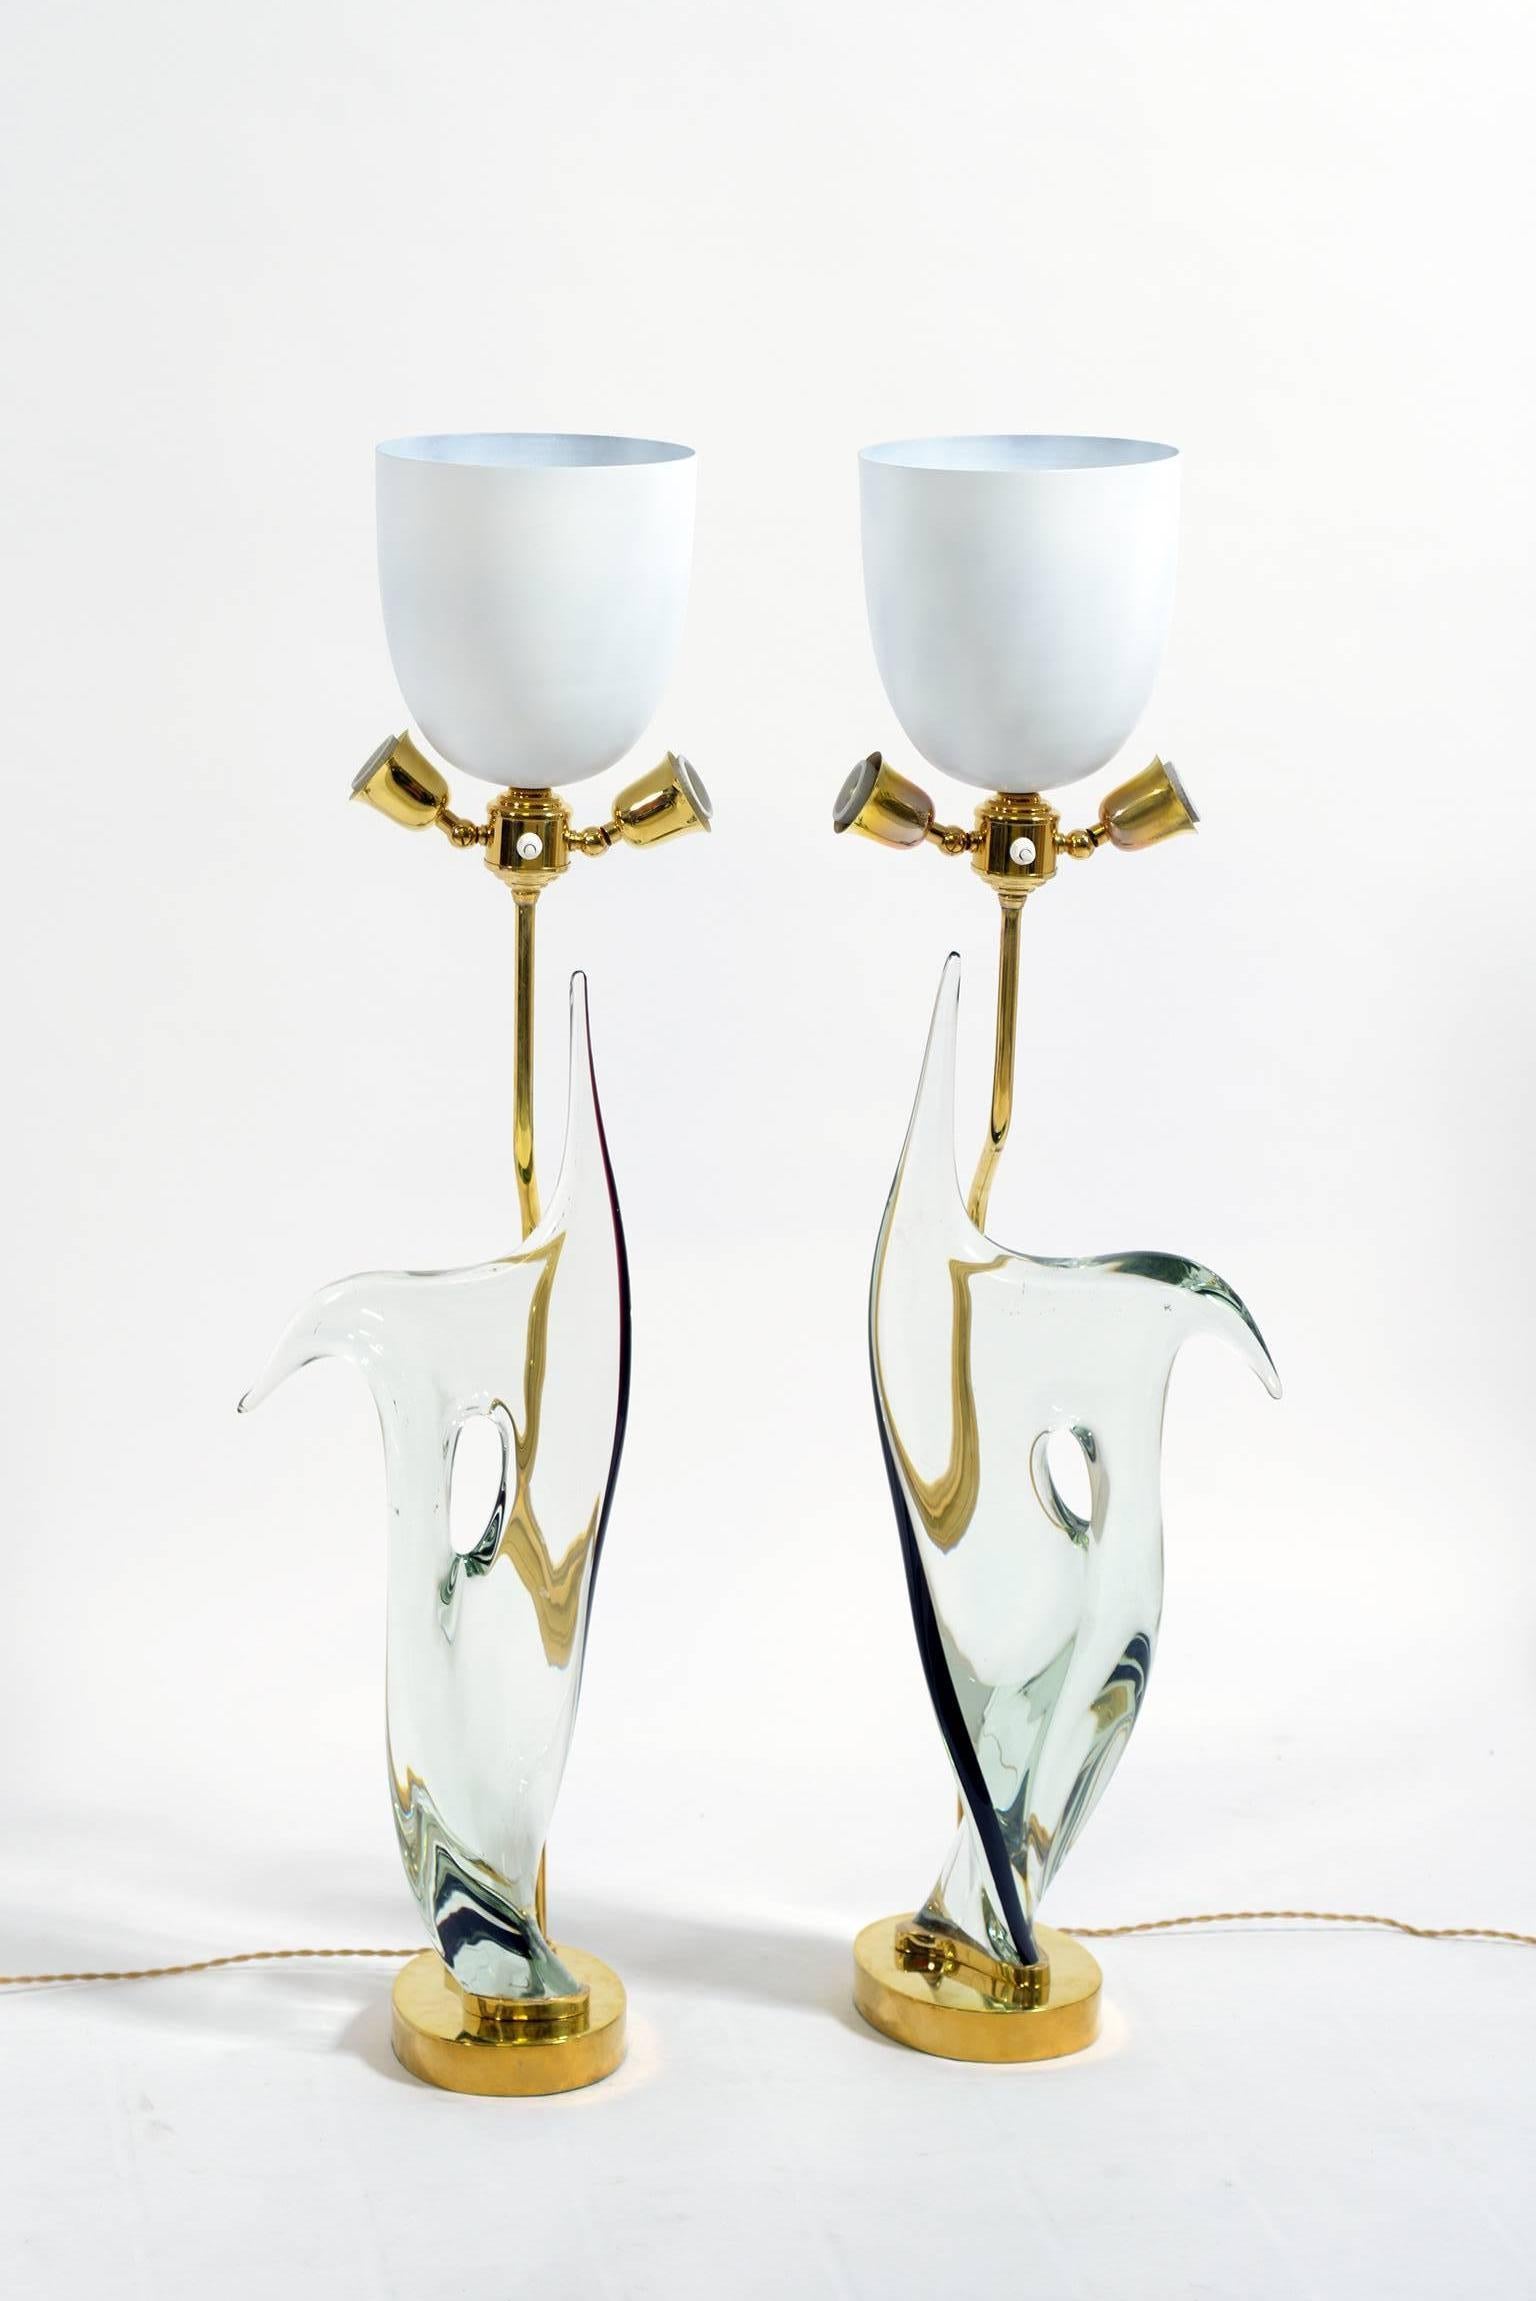 Midcentury Table Lamps Transparent Murano Glass and Brass by Cenedese 4